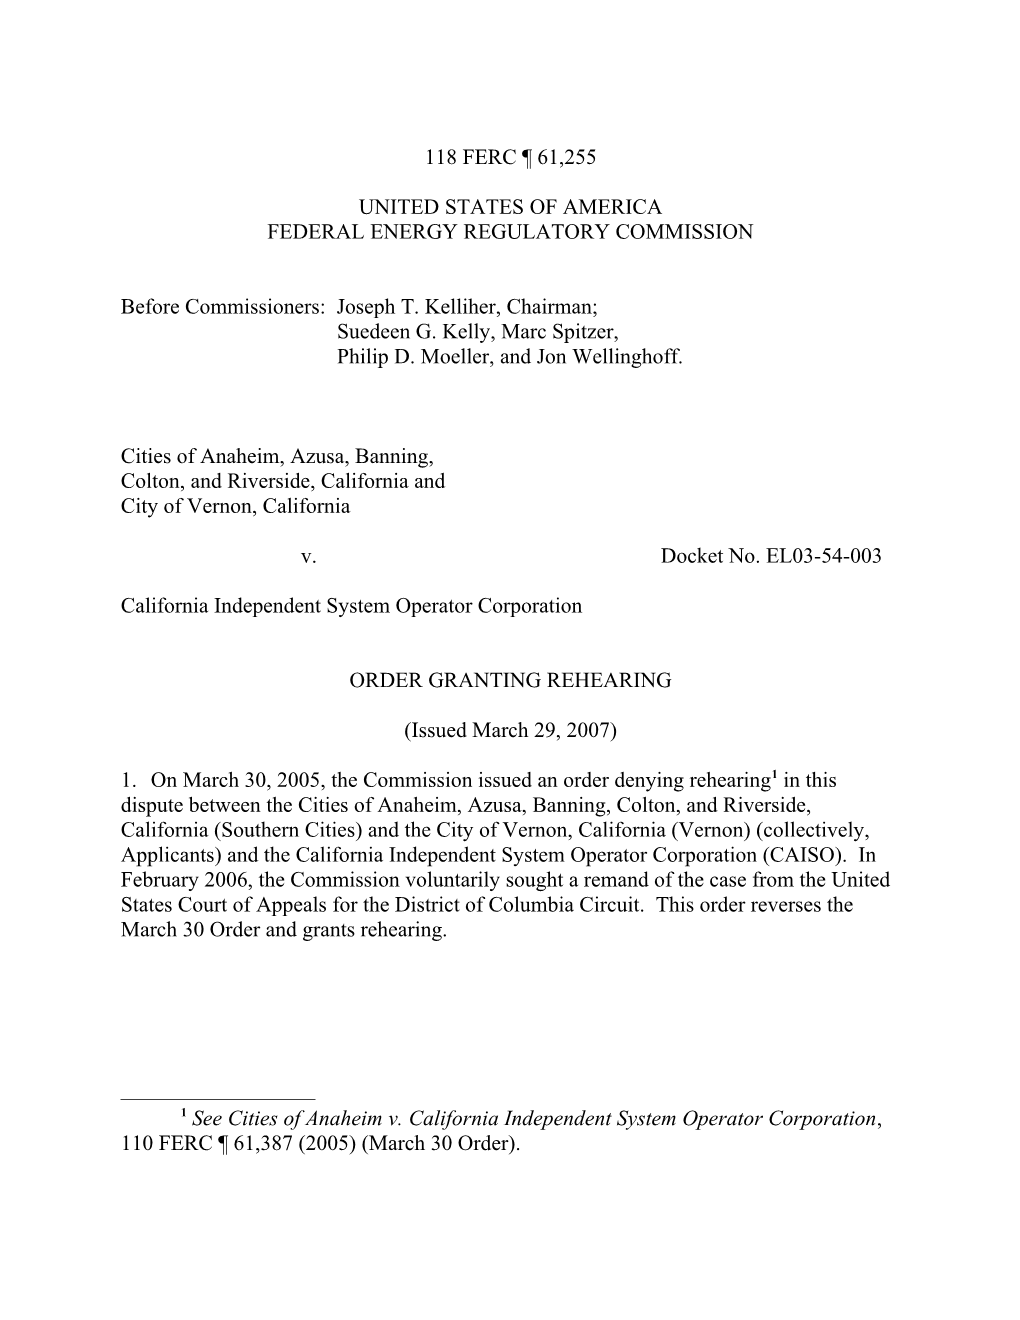 March 29, 2007 Order Granting Rehearing in Docket No. EL03-54-003 (Southern Cities V. CAISO)